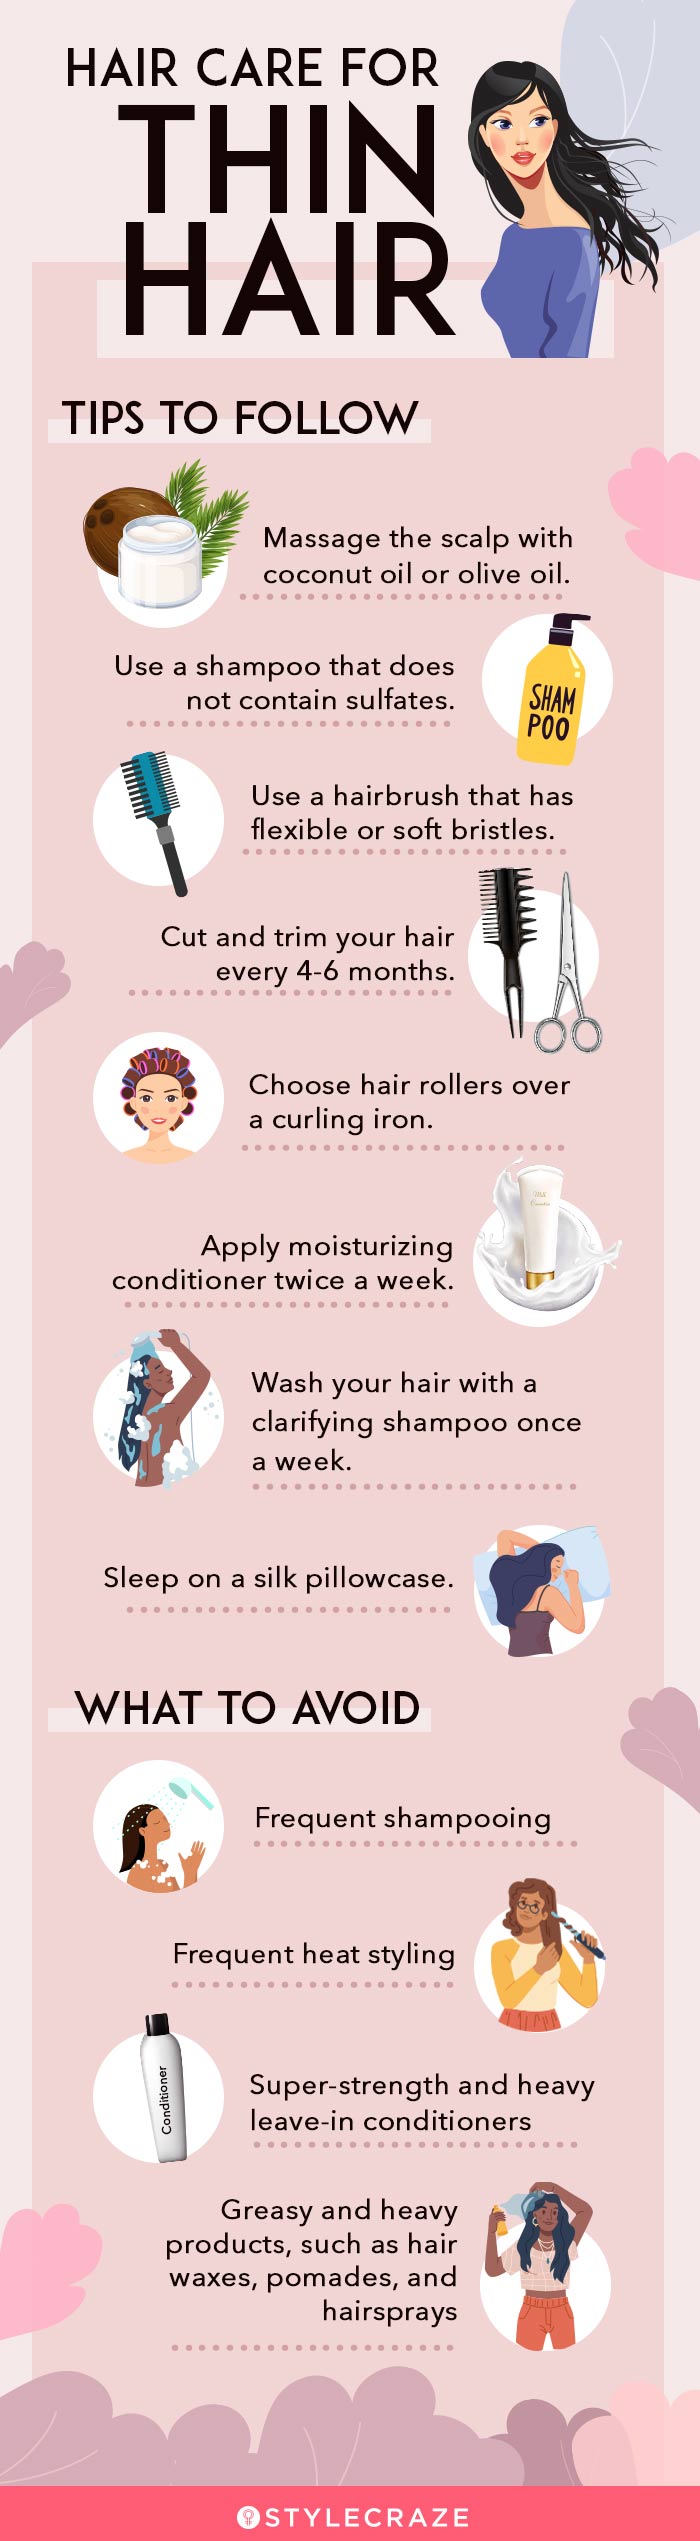 hair care for thin hair [infographic]